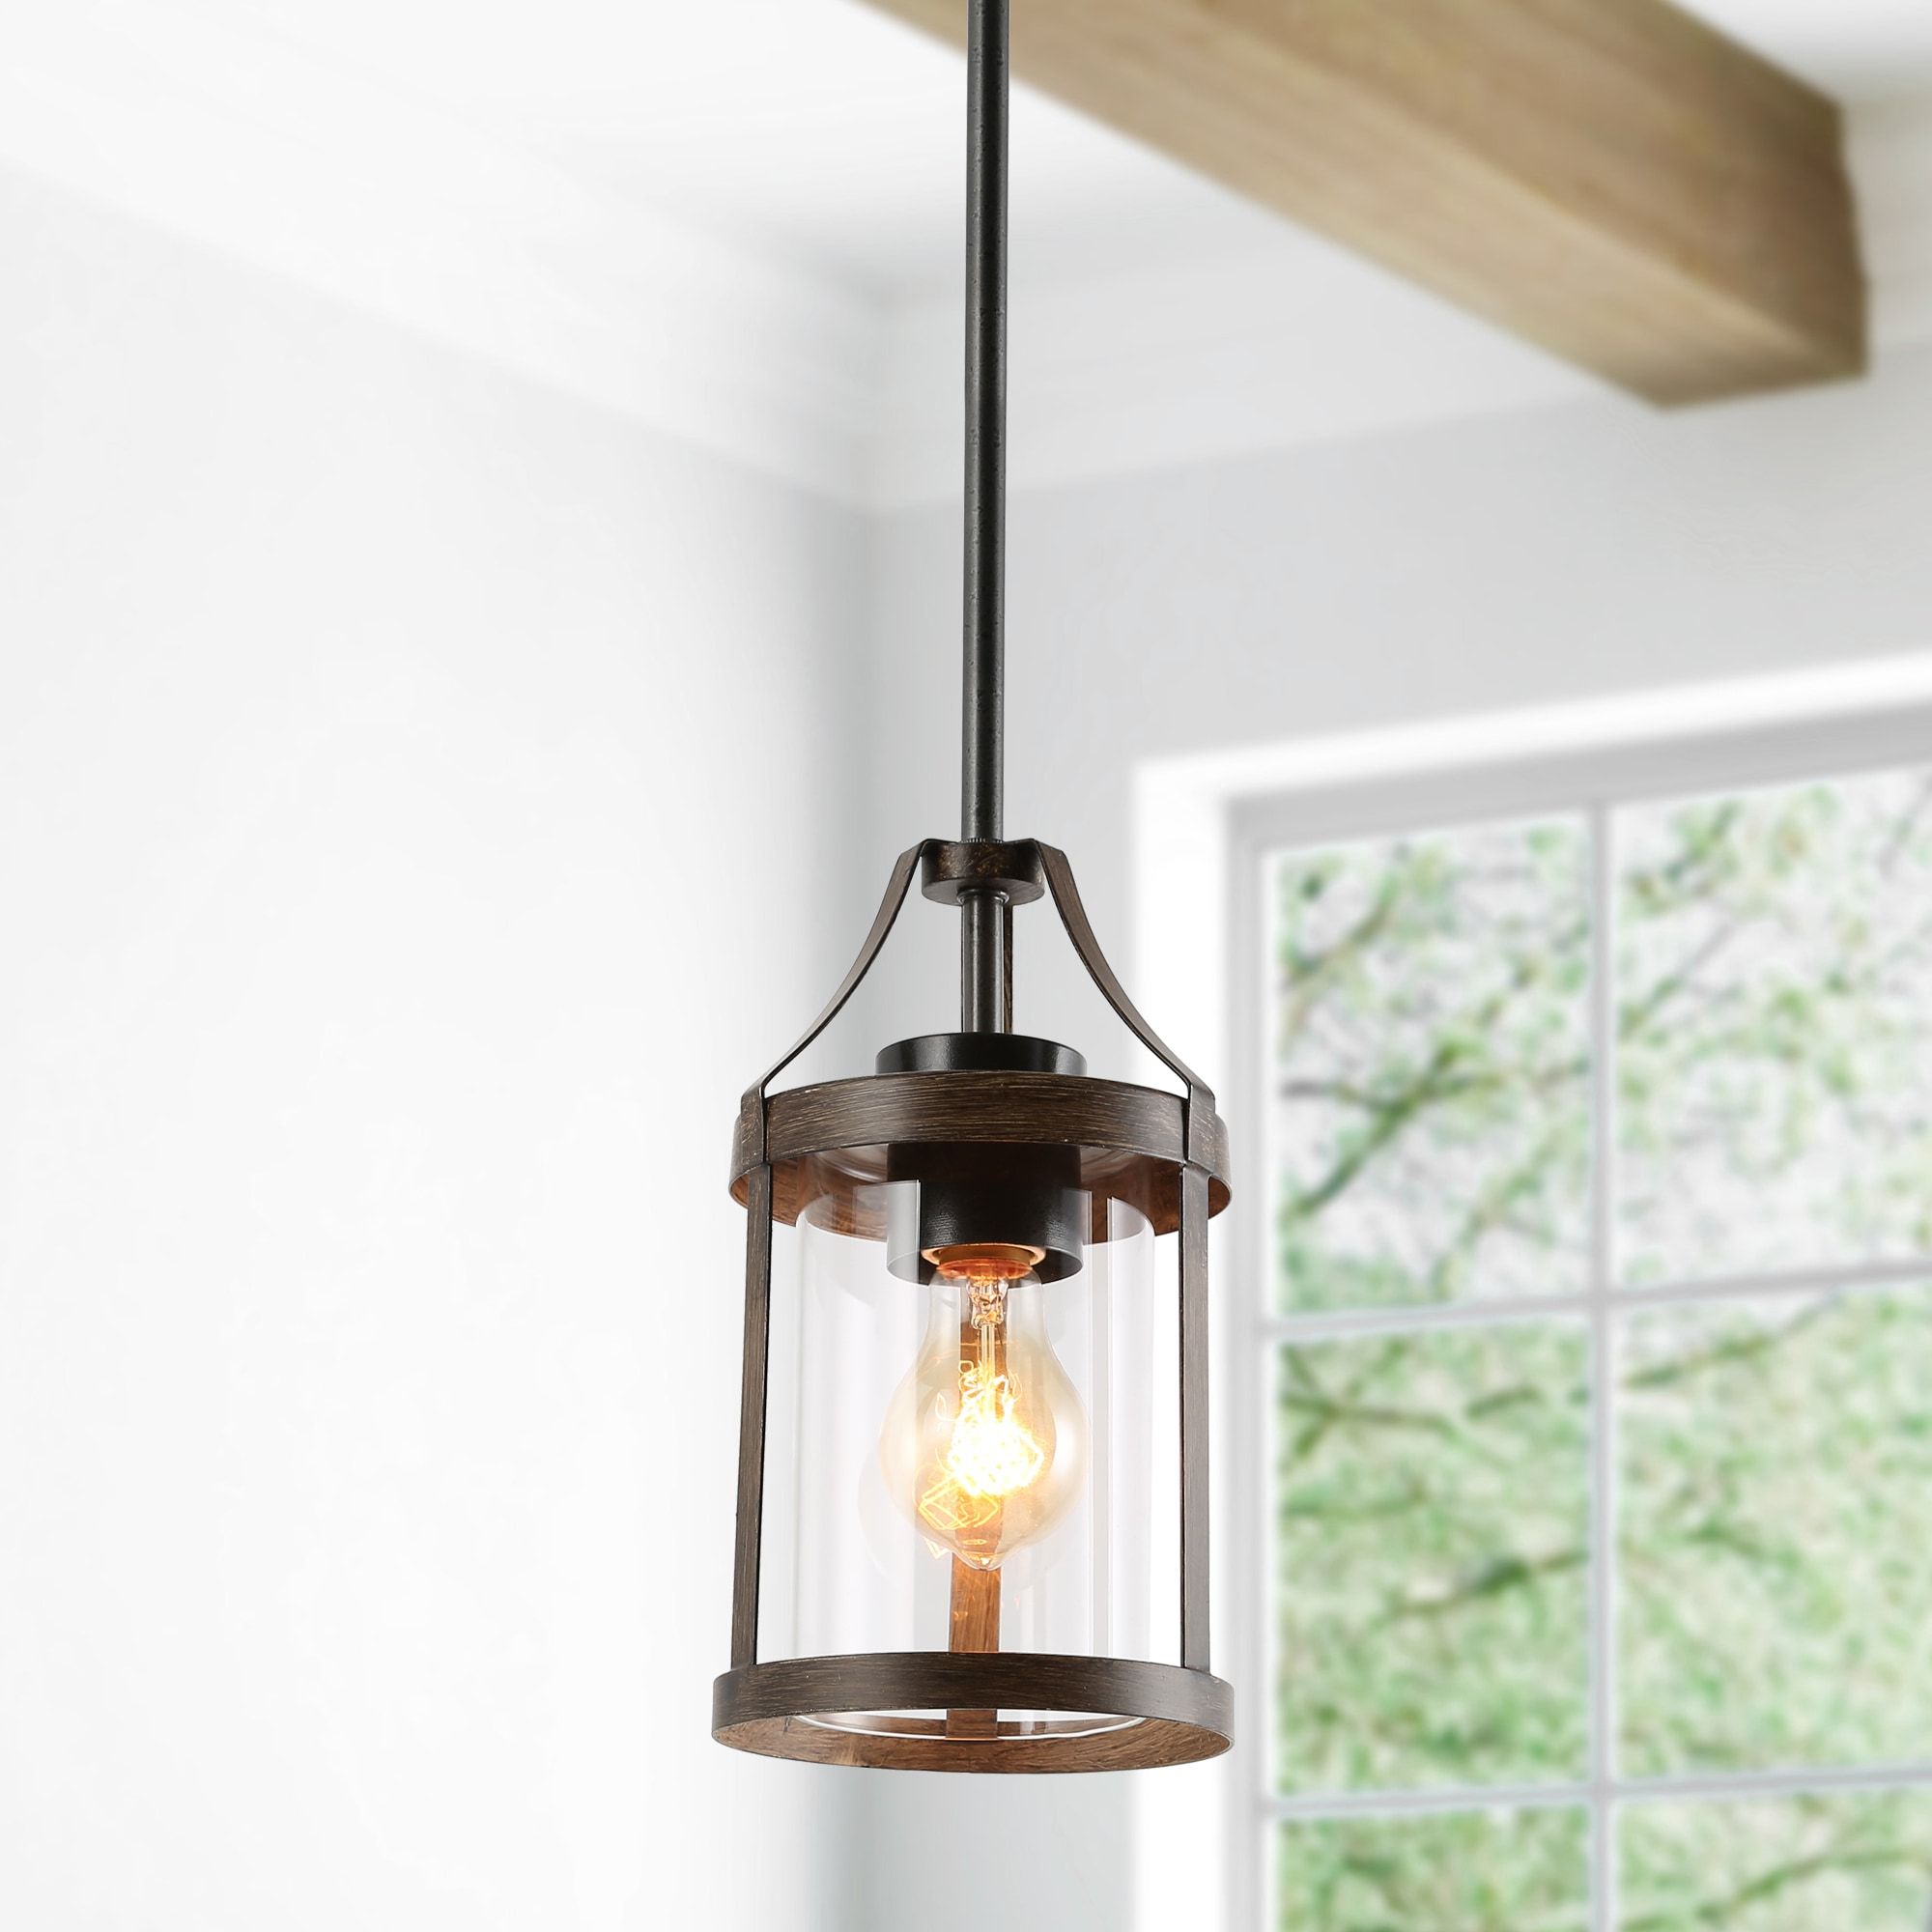 Latest Lnc Maven Distressed Brown And Antique Black Farmhouse Lantern Led Mini  Kitchen Island Light In The Pendant Lighting Department At Lowes With Regard To Sand Black Lantern Chandeliers (View 9 of 10)